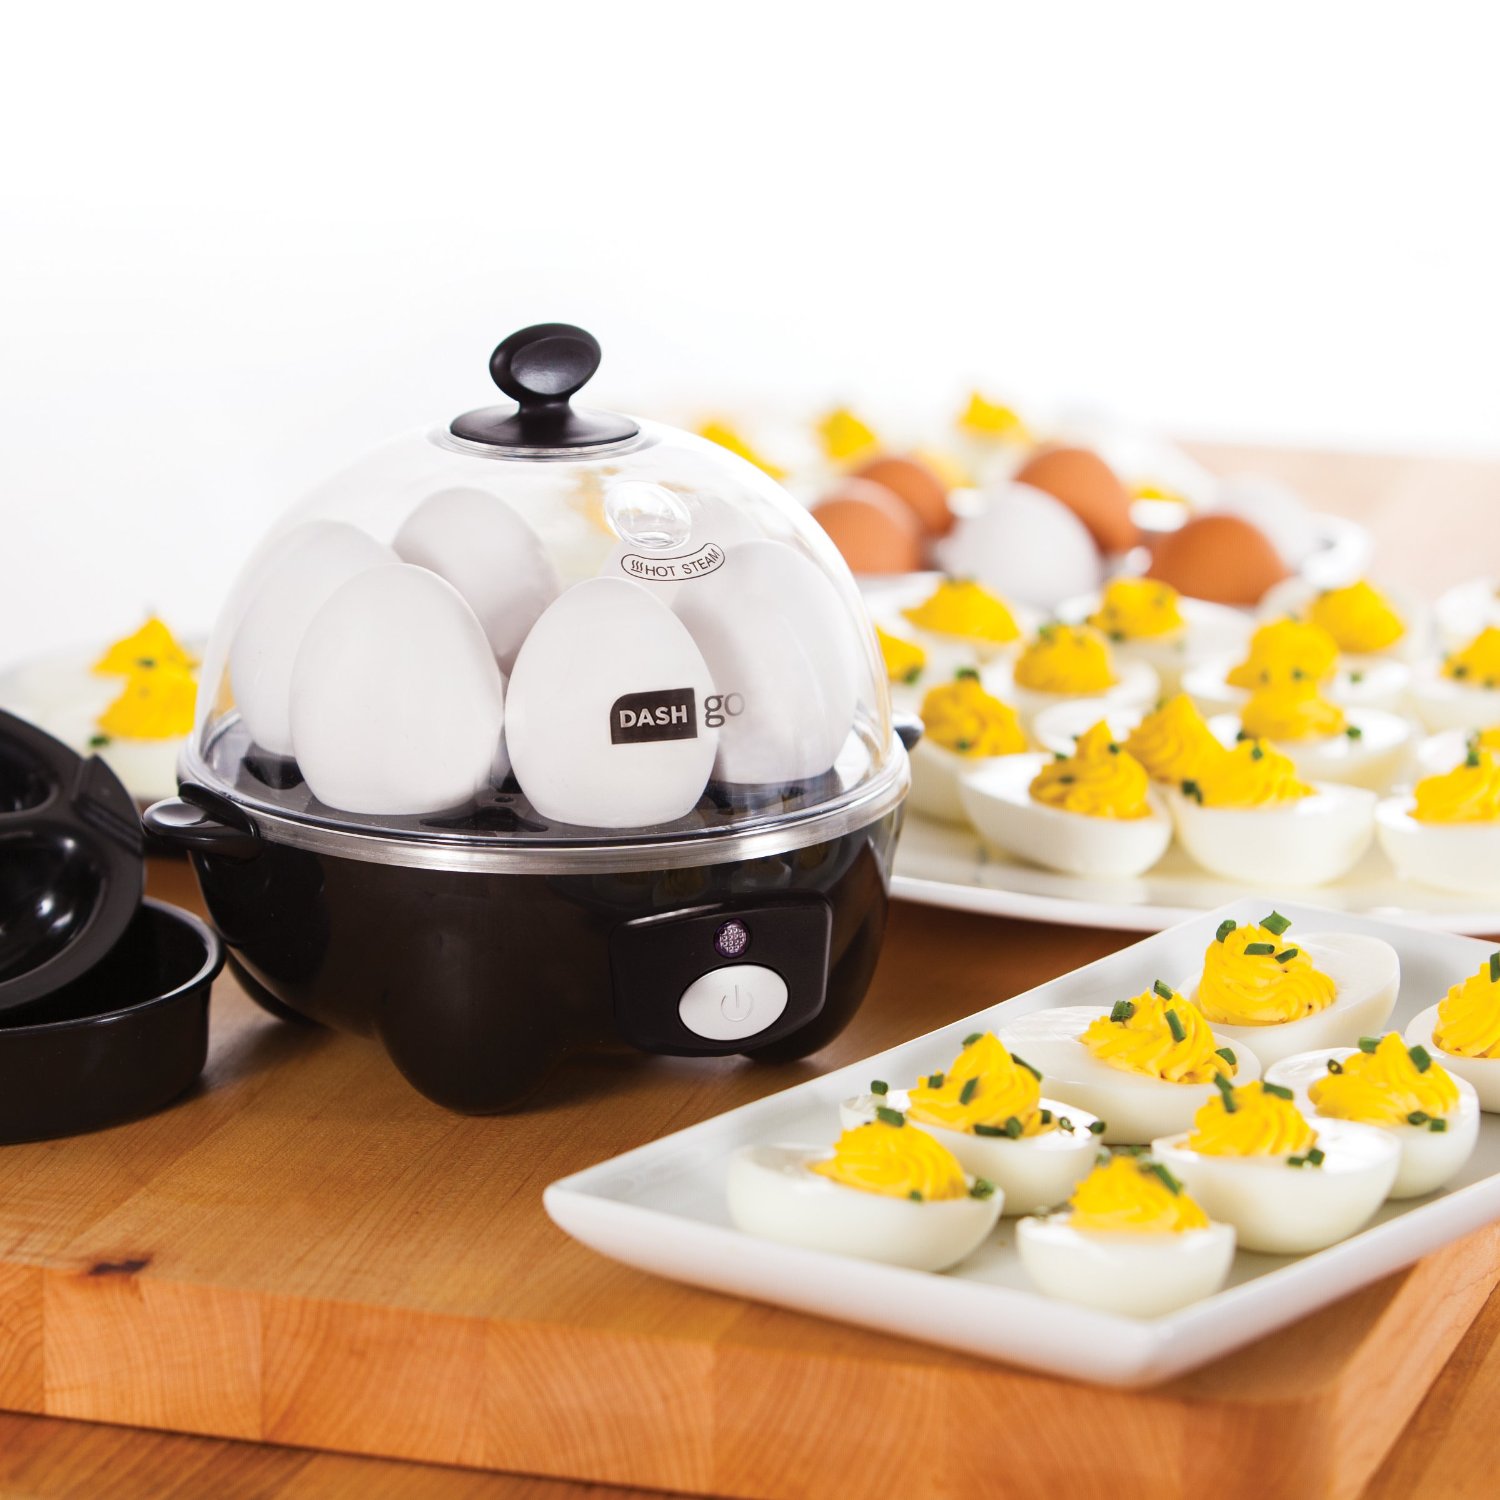 Dash Go Rapid Egg Cooker in Black or White for Just $14.96!